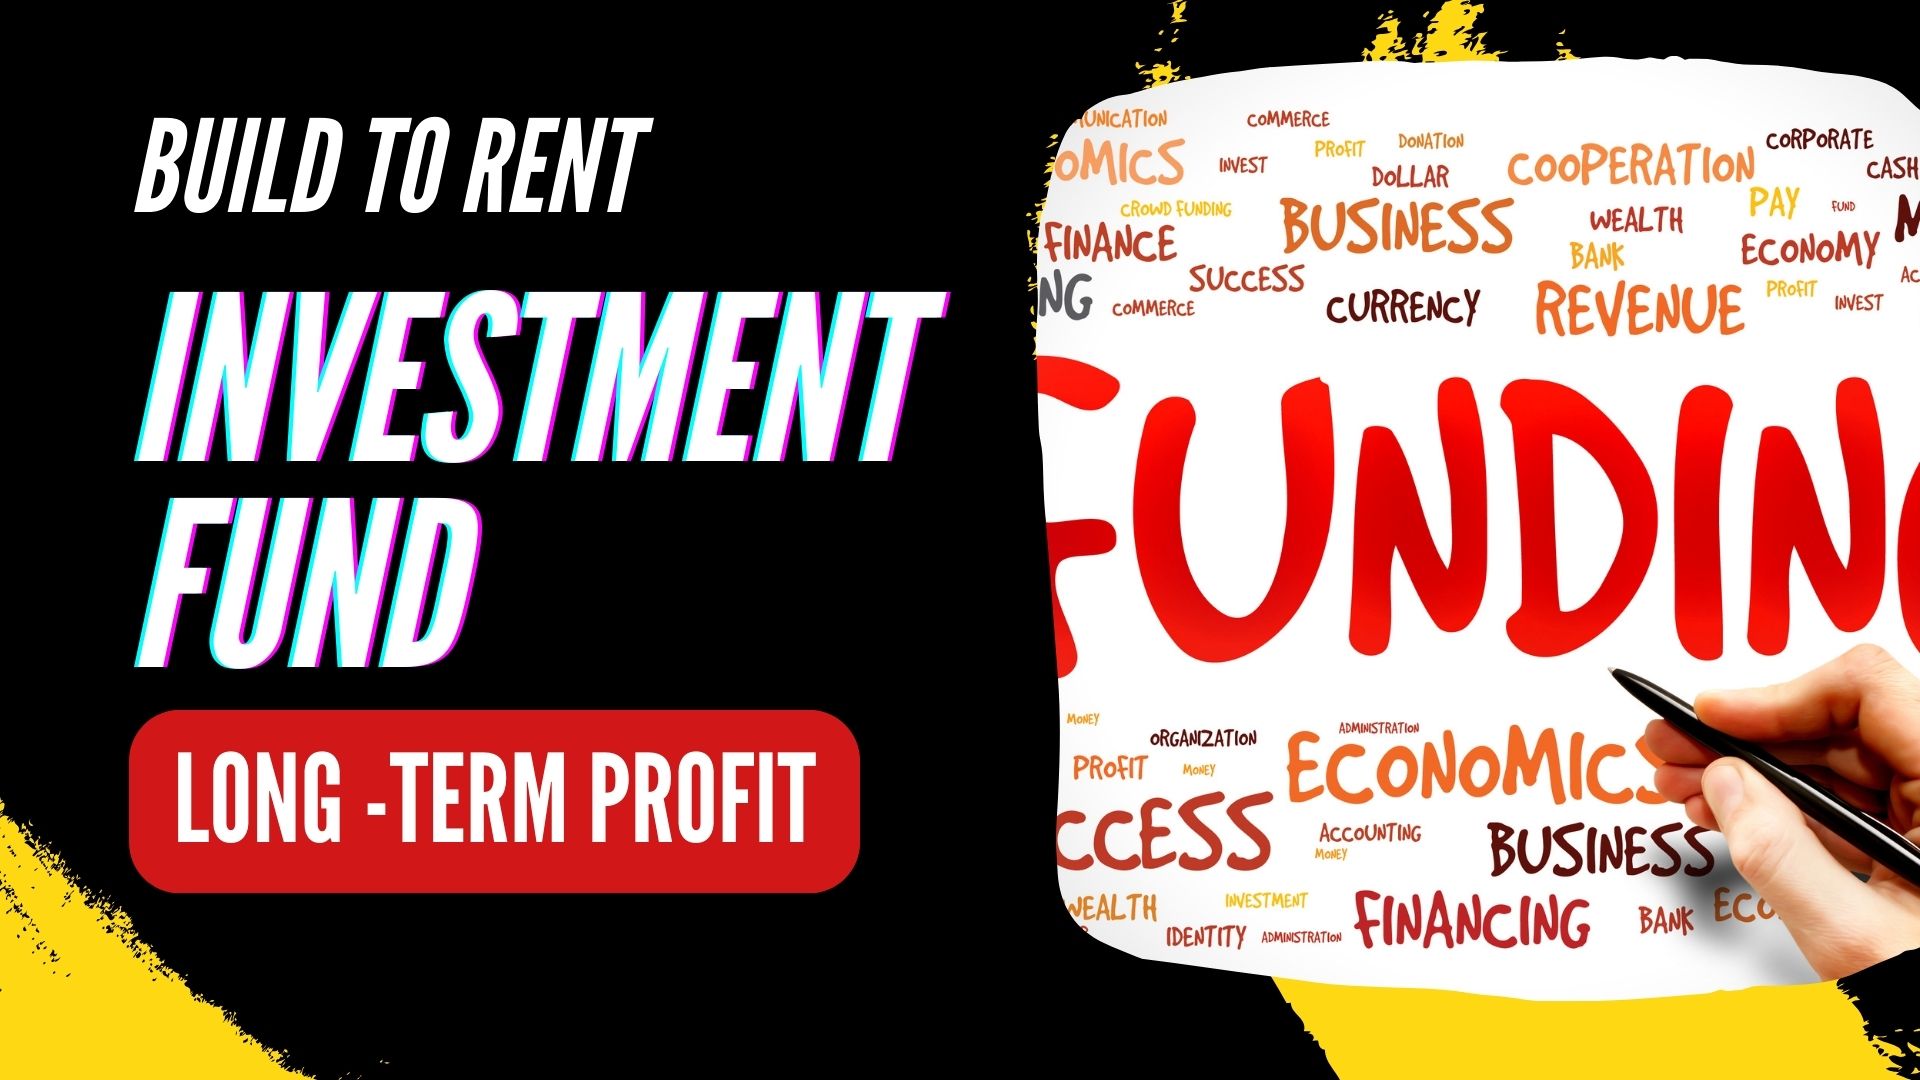 Build to Rent Investment Funds